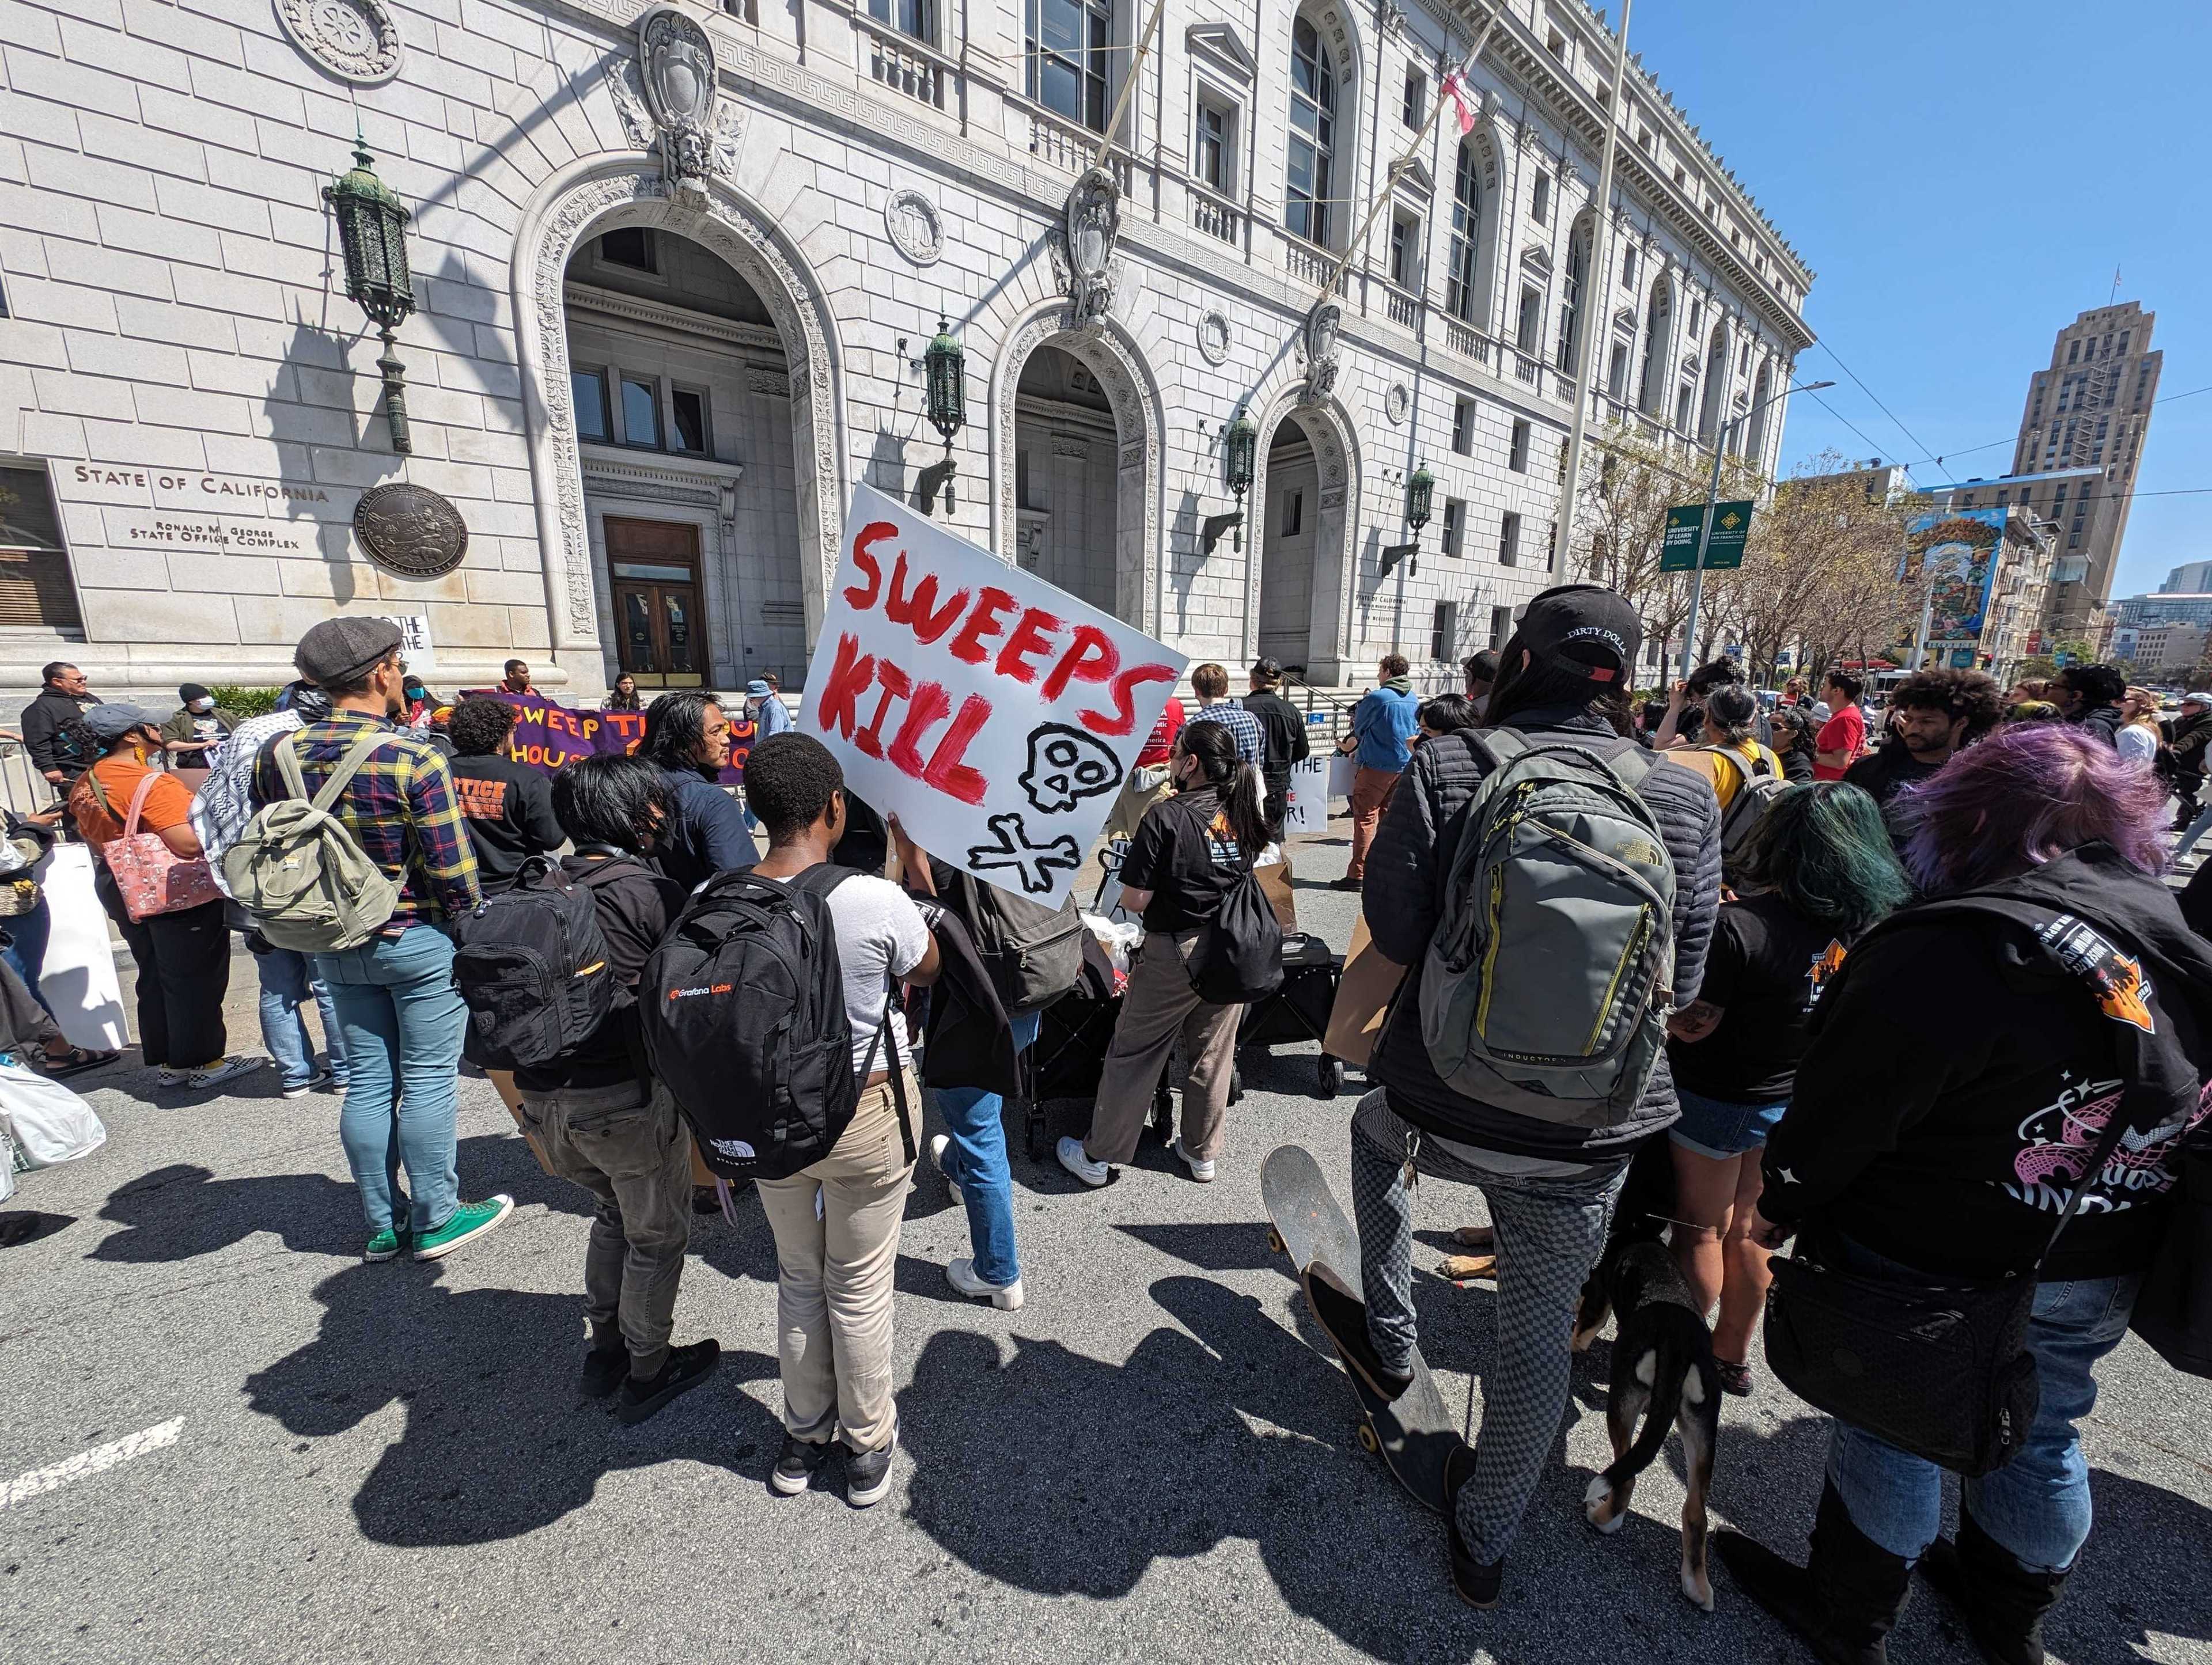 A group of protestors with signs, one reading "SWEEPS KILL", in front of a grand building on a sunny day.